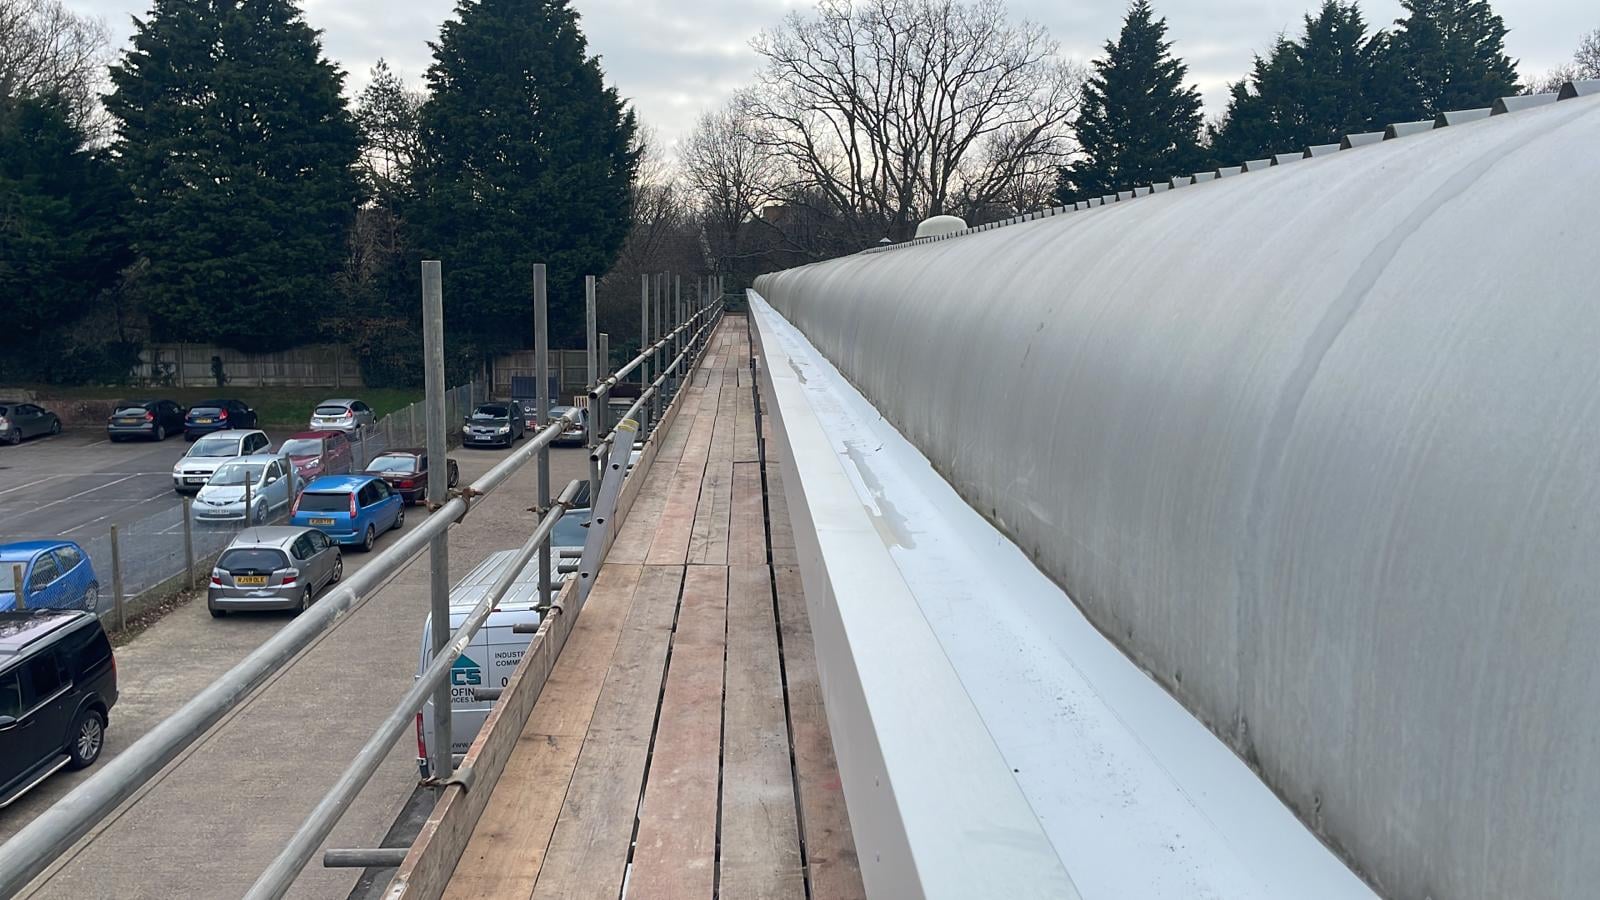 Gutter repair work for business centre in Burgess Hill, West Sussex